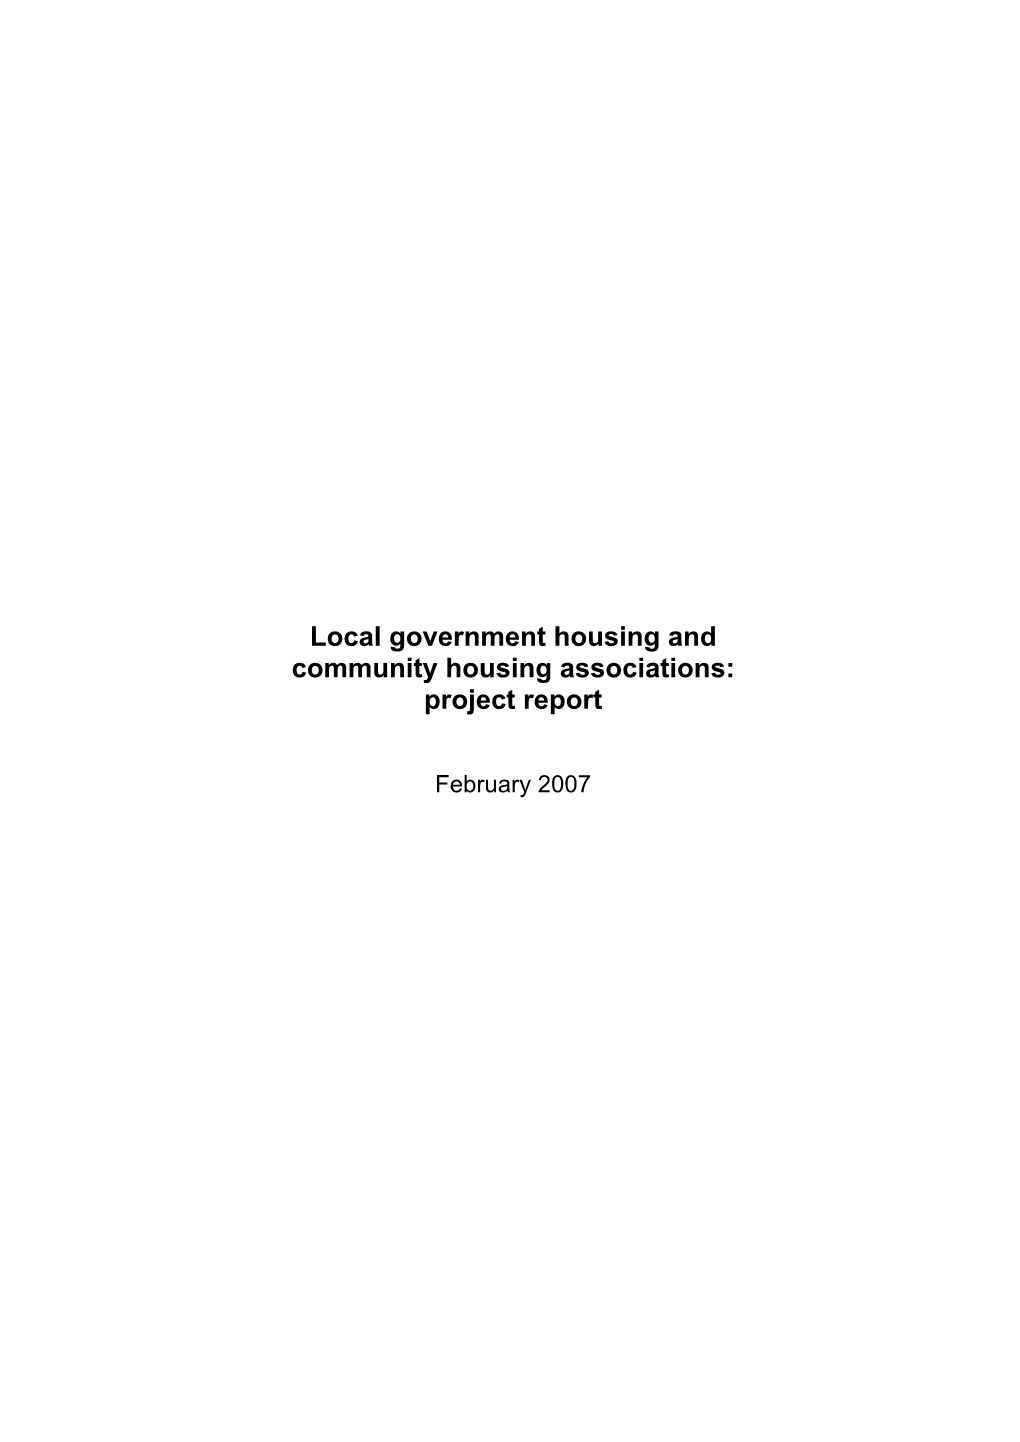 Local Government Housing and Community Housing Associations: Project Report